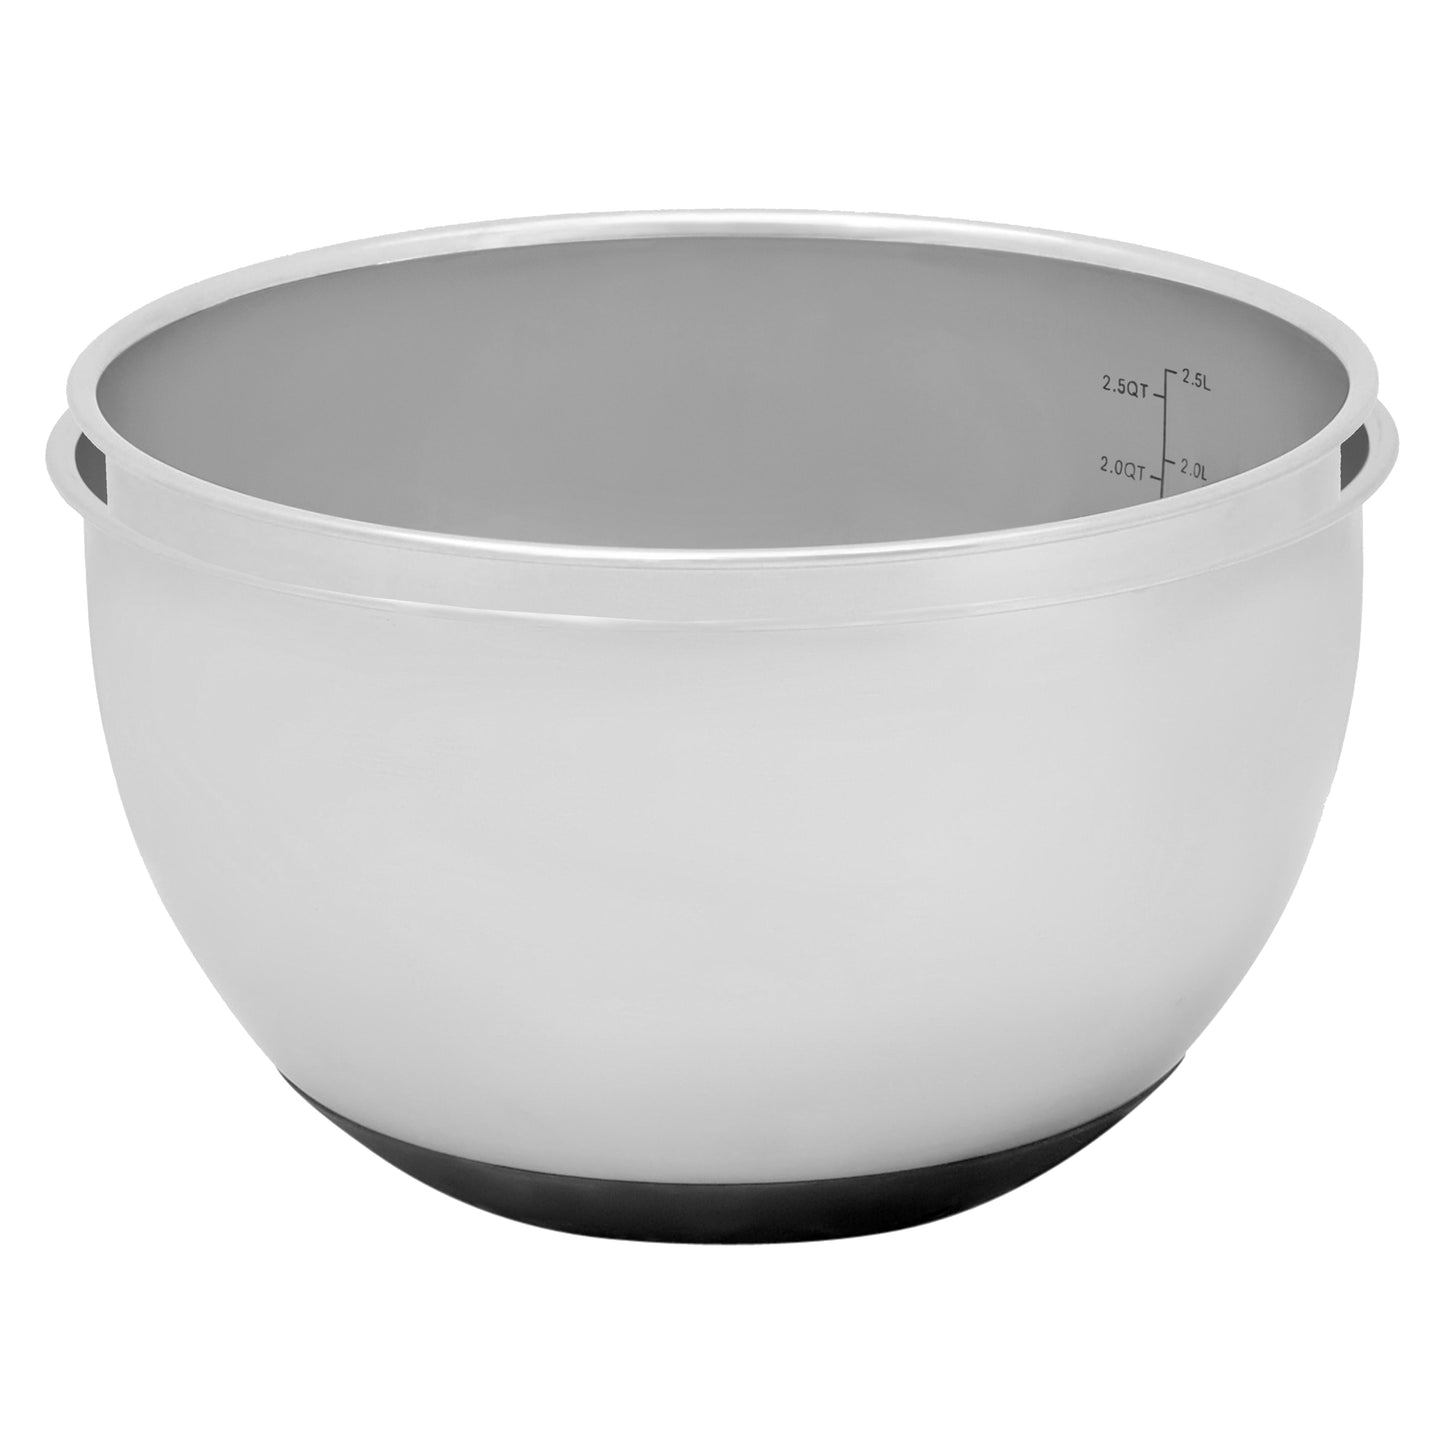 Westinghouse Mixing Bowl Set 2 Piece Stainless Steel